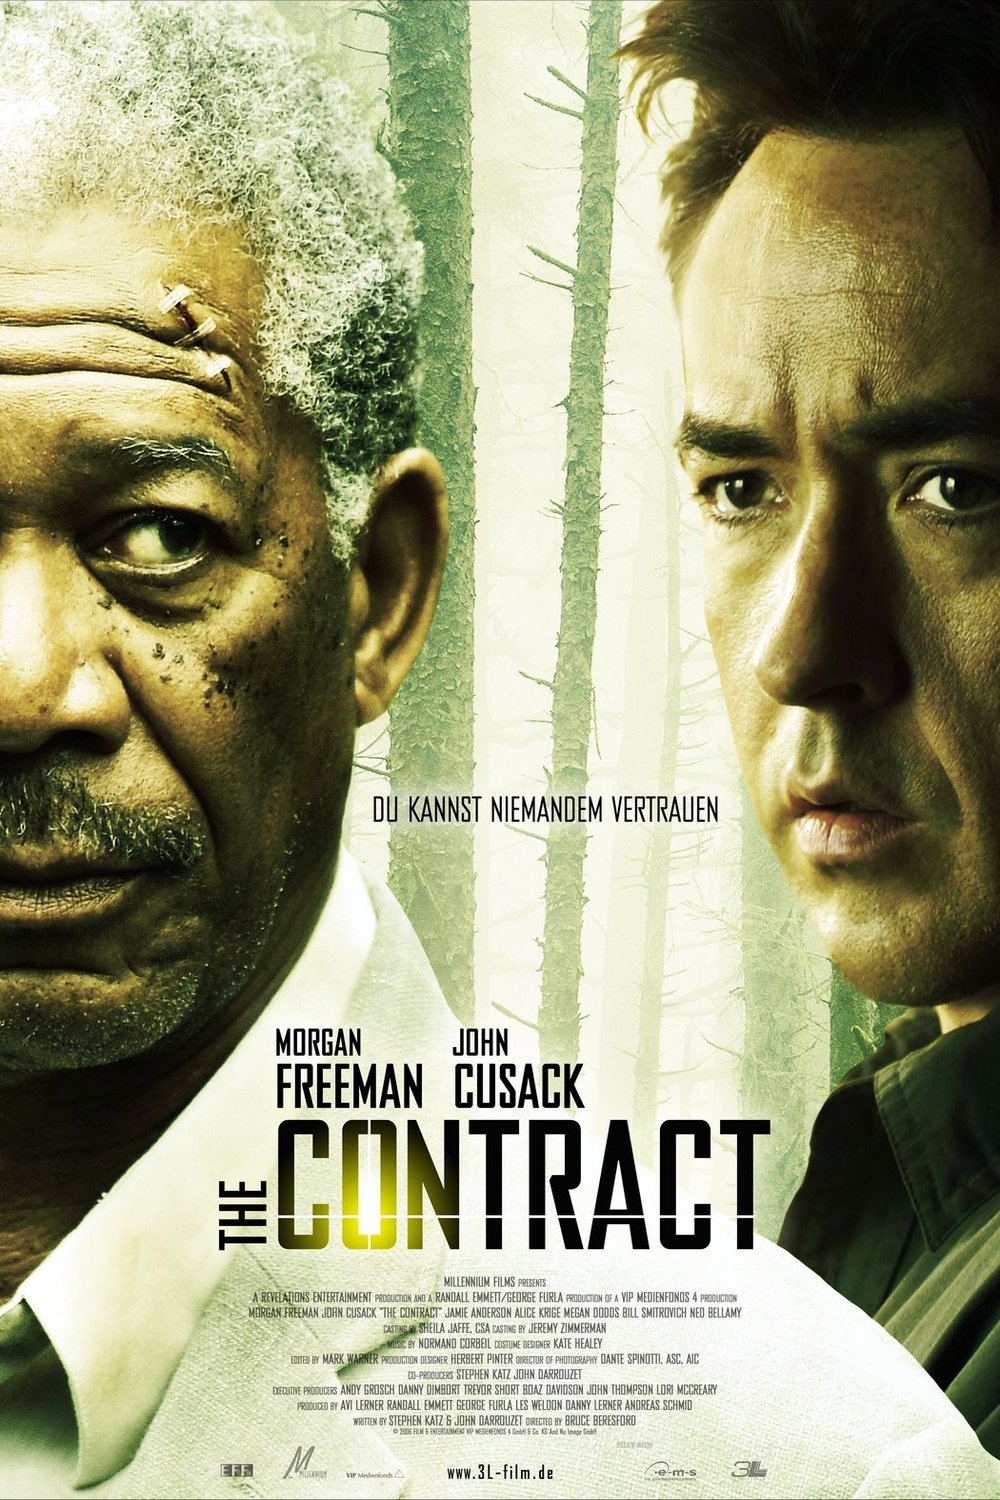 Poster of the movie The Contract